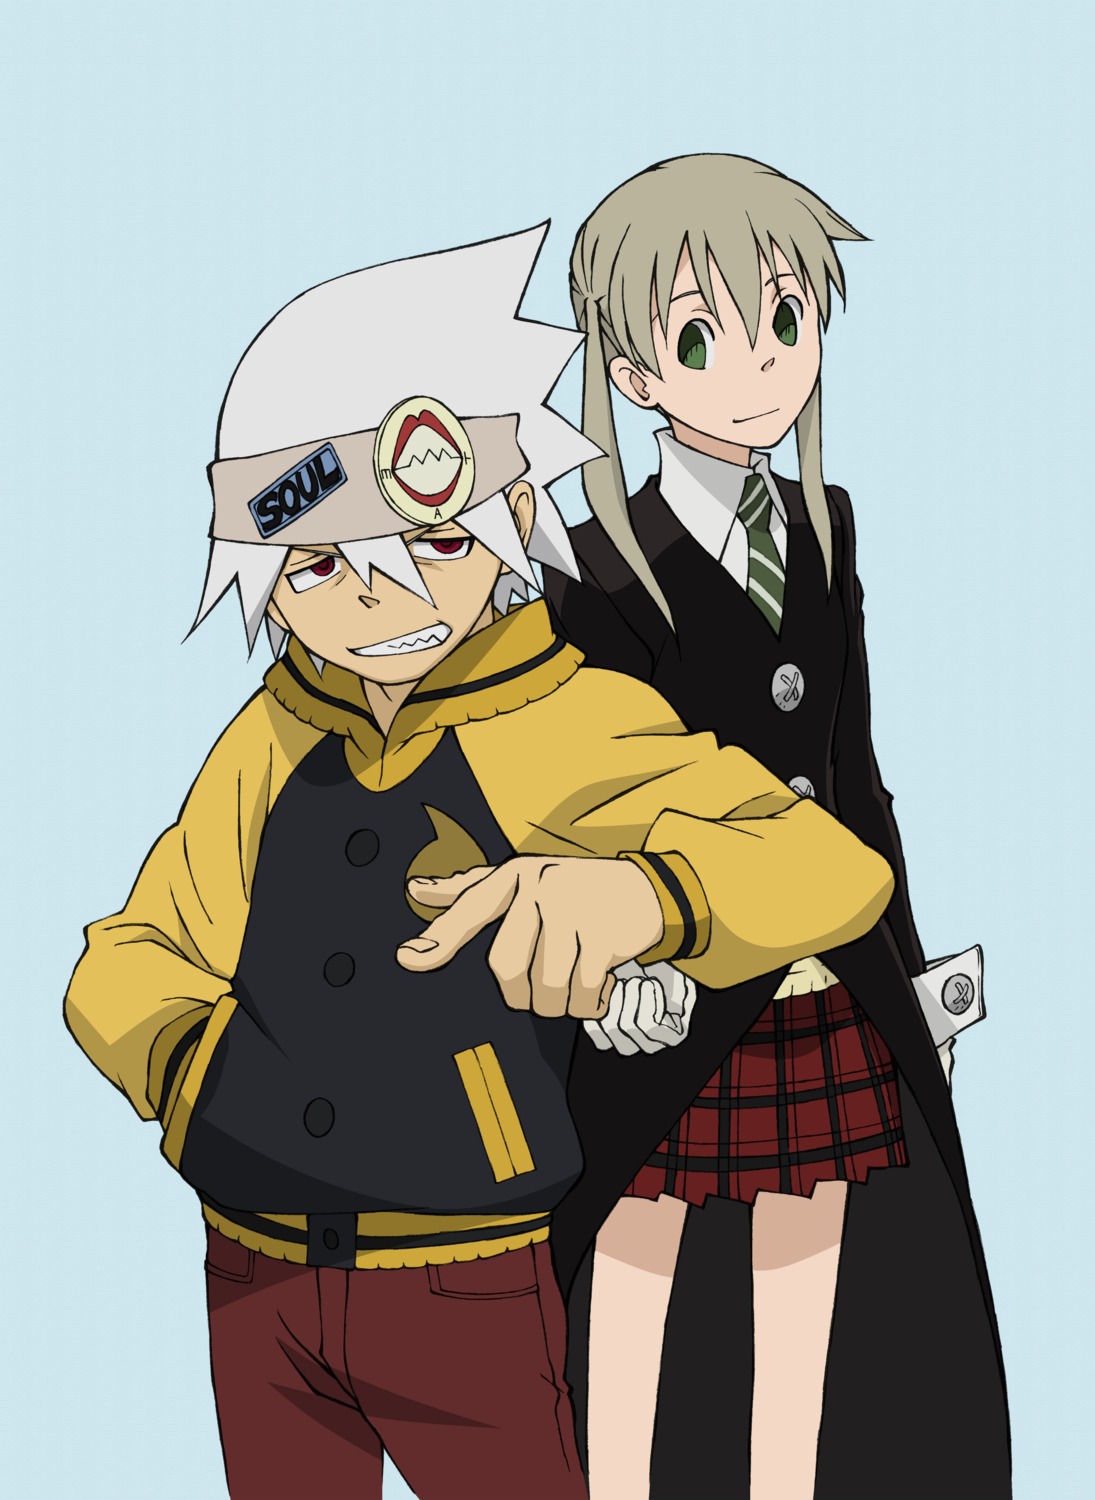 Who's your favorite character? : r/souleater